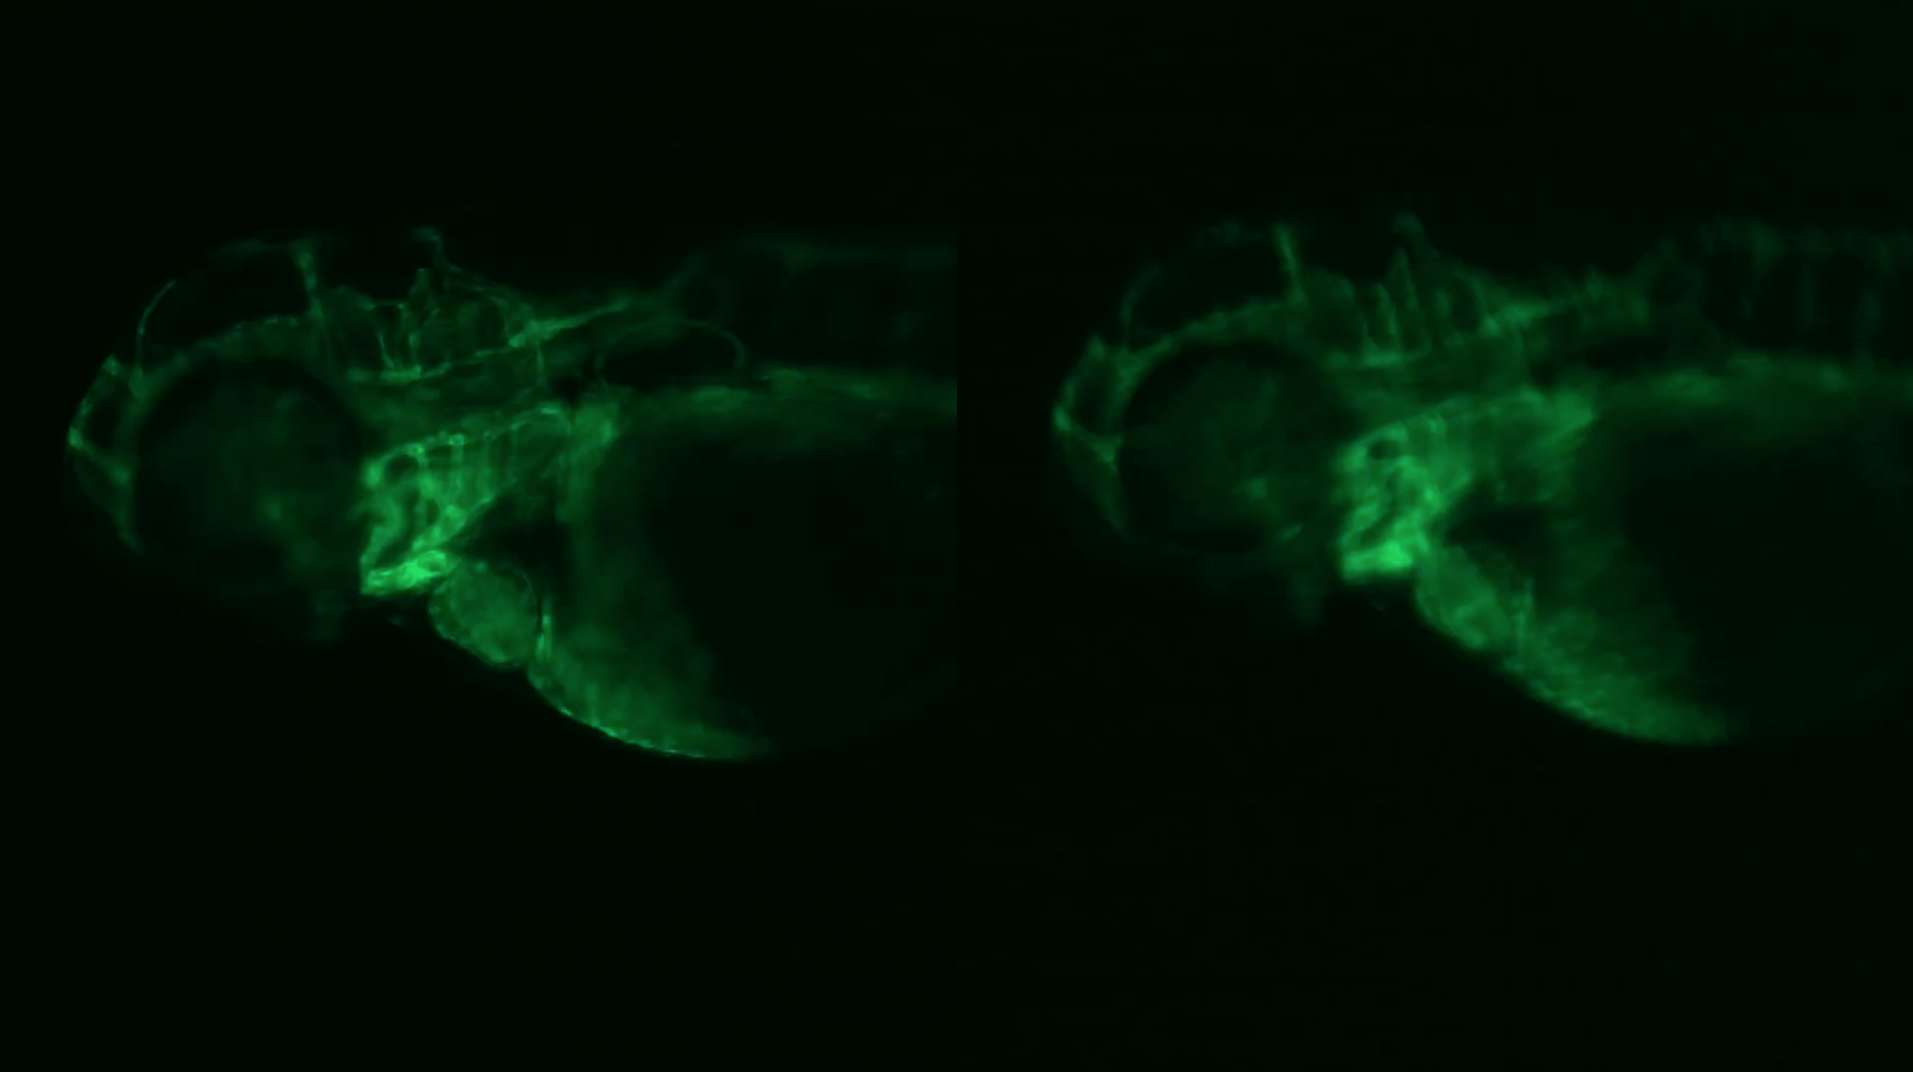 How to Correct Aberration in Stereo Microscopy by Using the Right Objective Lenses